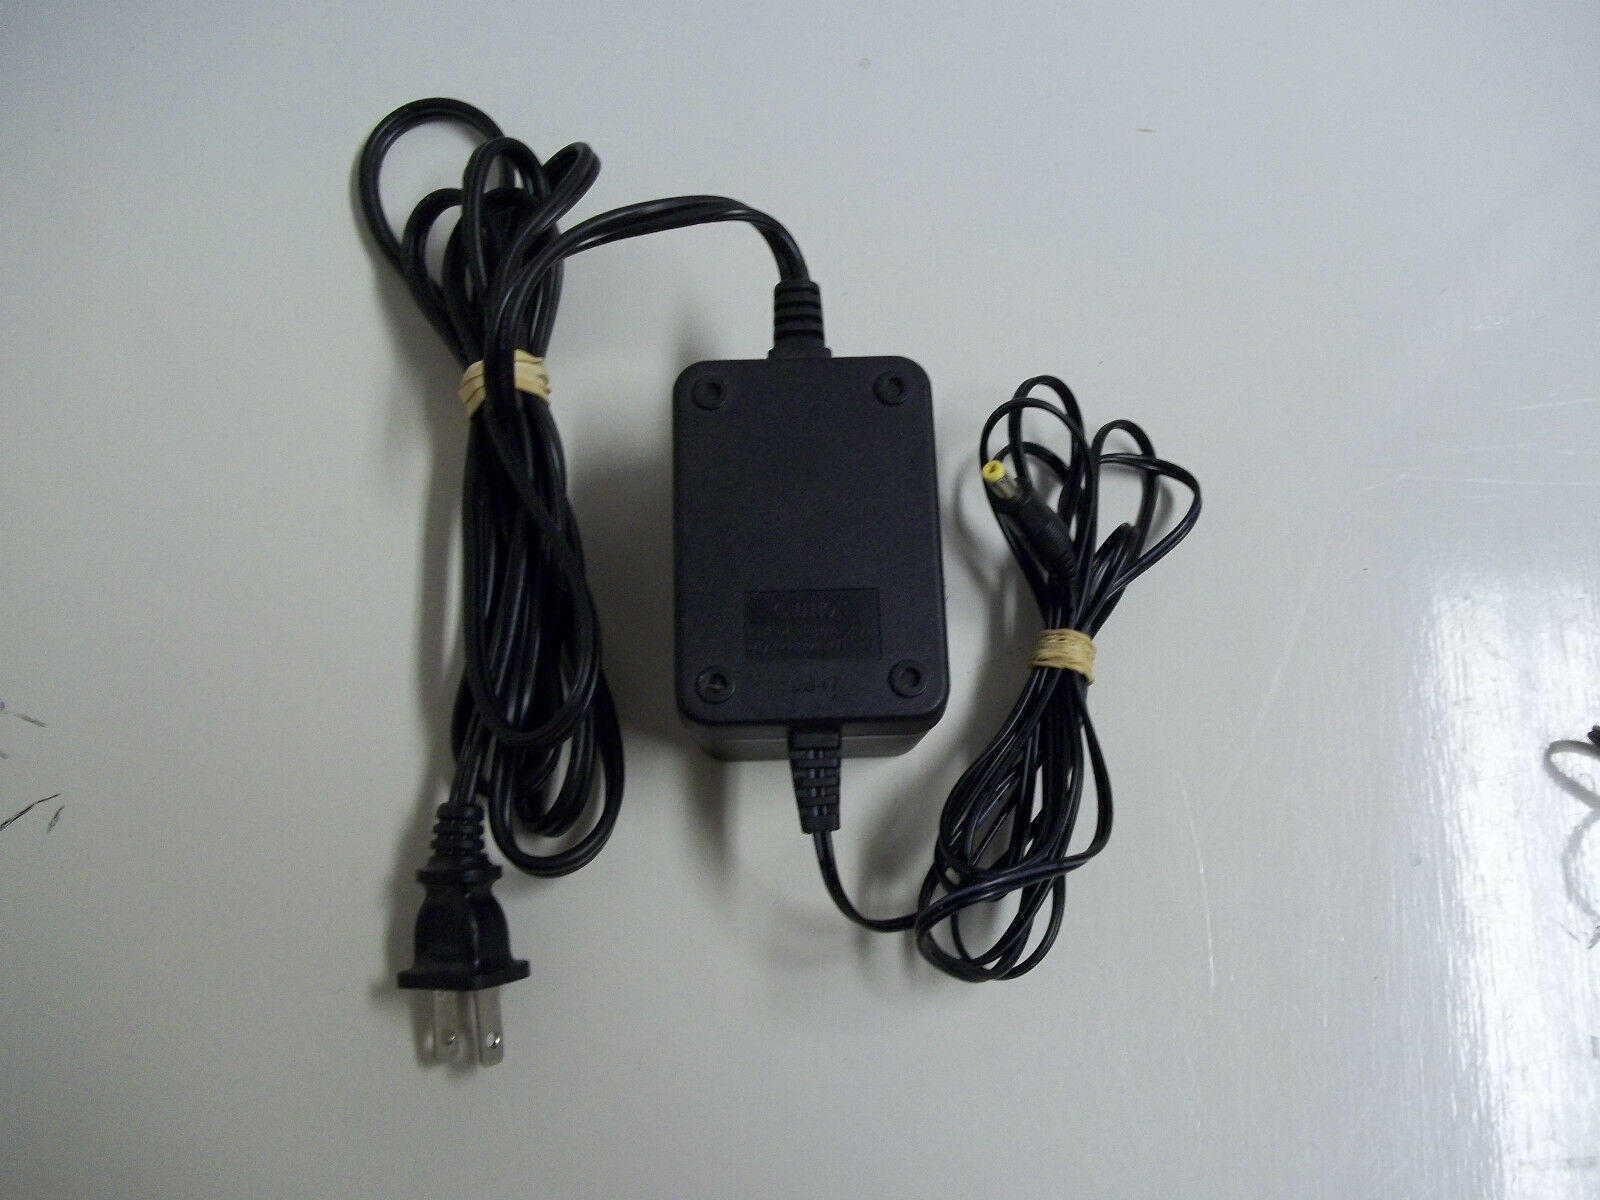 New AD-48151000D 15V DC 1000mA Power Adapter